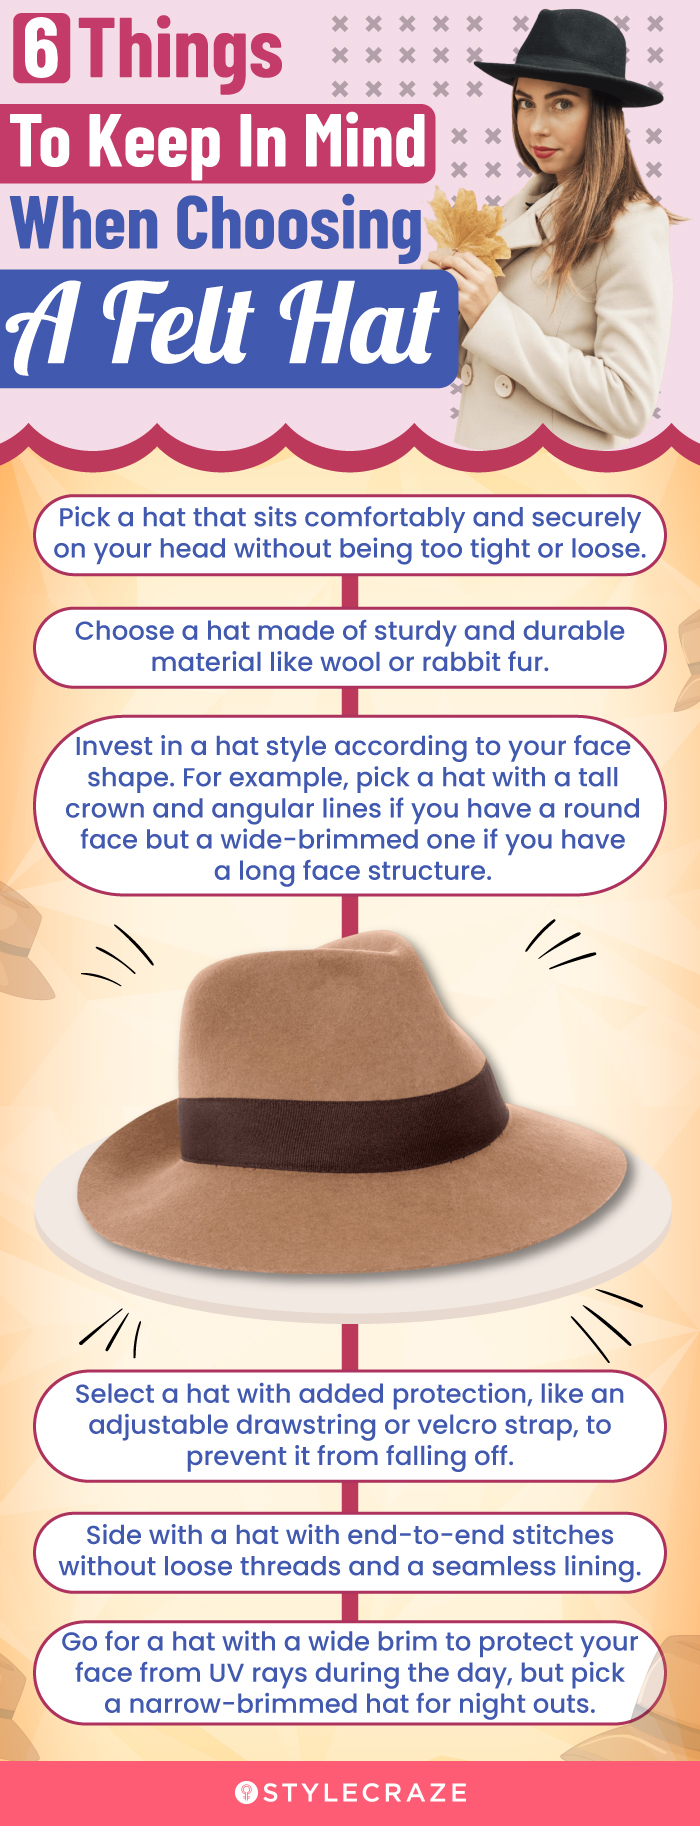 6 Things To Keep In Mind When Choosing A Felt Hat (infographic)